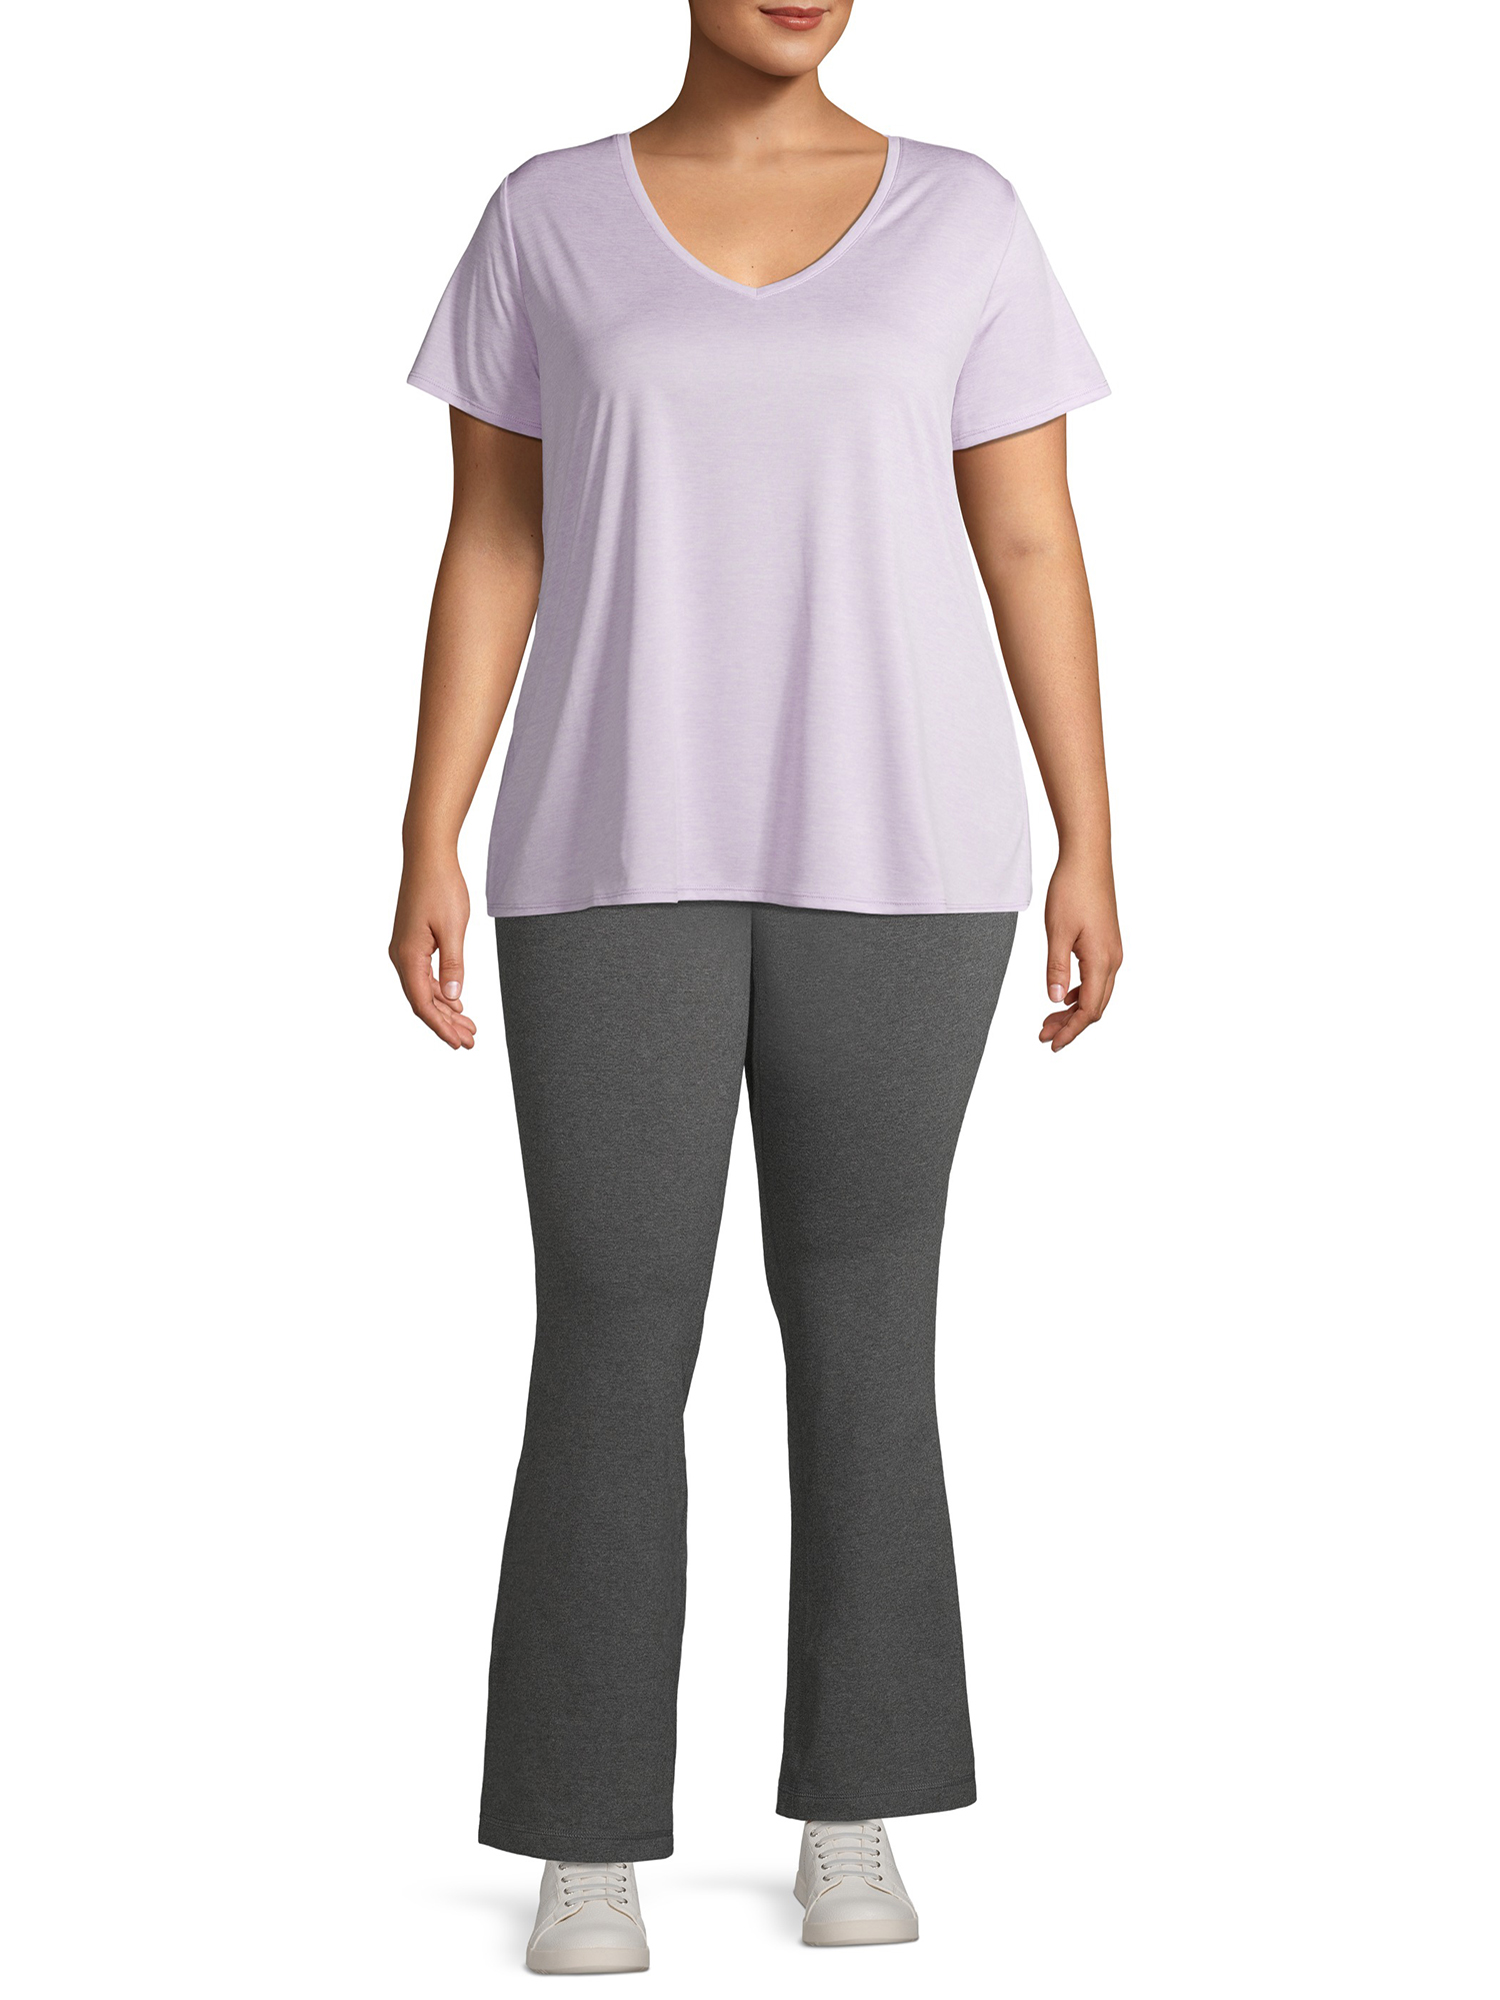 Athletic Works Women’s and Women's Plus Stretch Cotton Blend Straight Leg Pants - image 3 of 7